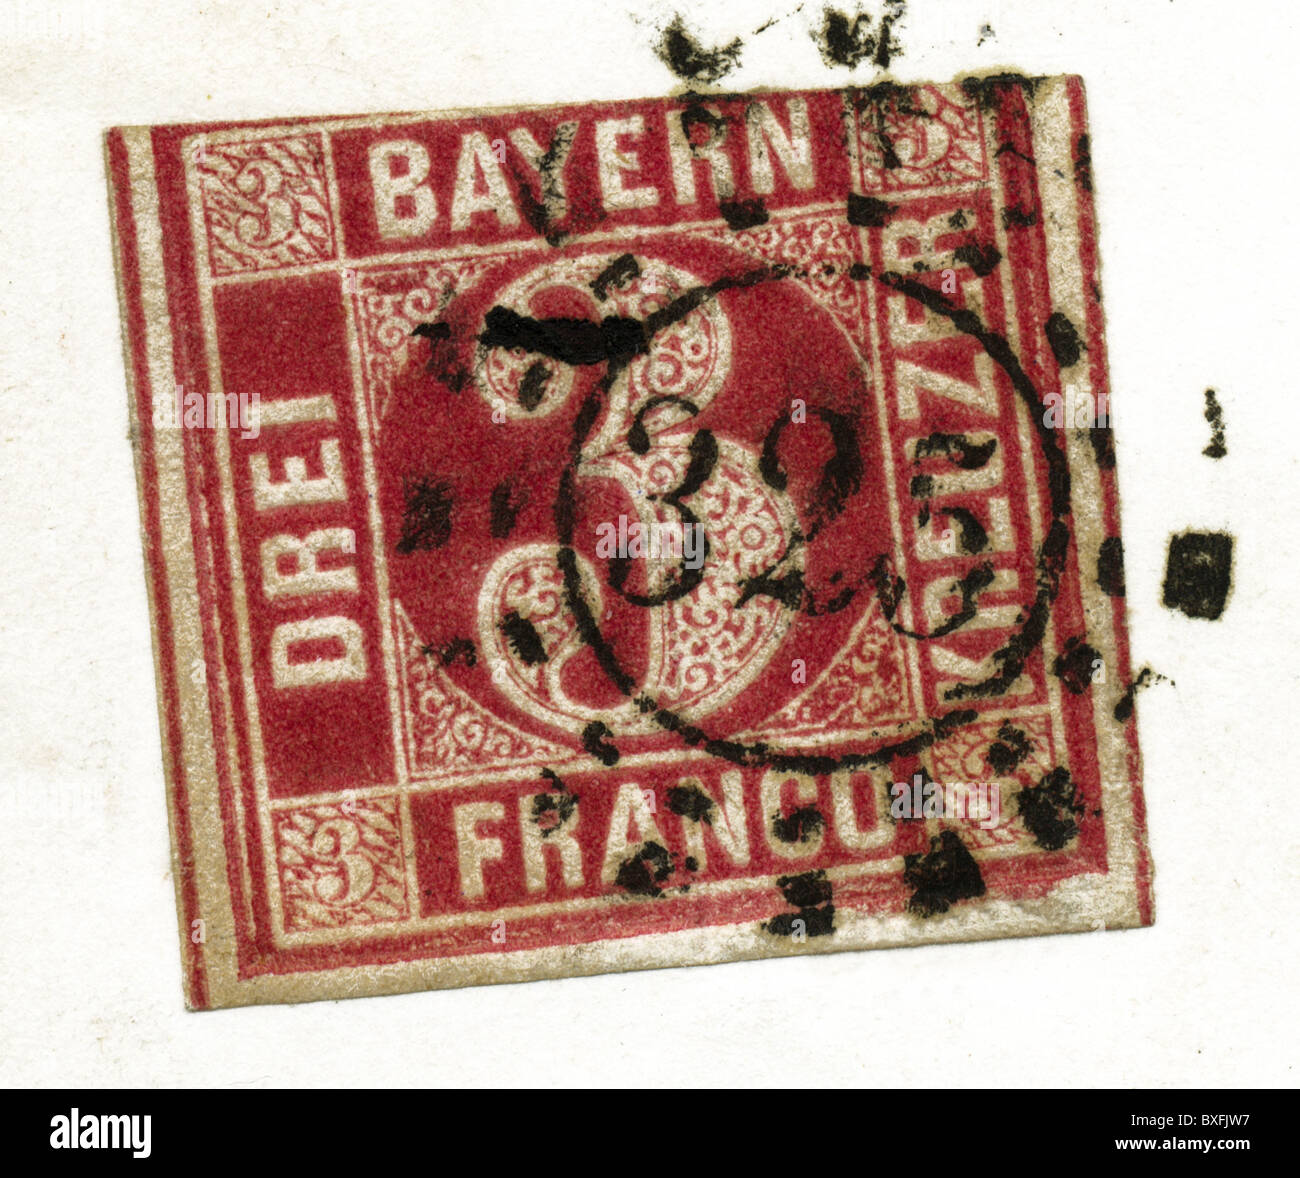 mail / post, stamps, sliced stamp, Bavaria, 1865, 1860s, 19th century, historic, historical, postage, Postage paid, three Kreuzer, 3, stamp, ticket, token, stamps, tickets, tokens, stamped, postmark, postmarks, philately, Bavarian post, correspondence, close-up, clipping, cut out, cut-out, cut-outs, Additional-Rights-Clearences-Not Available Stock Photo